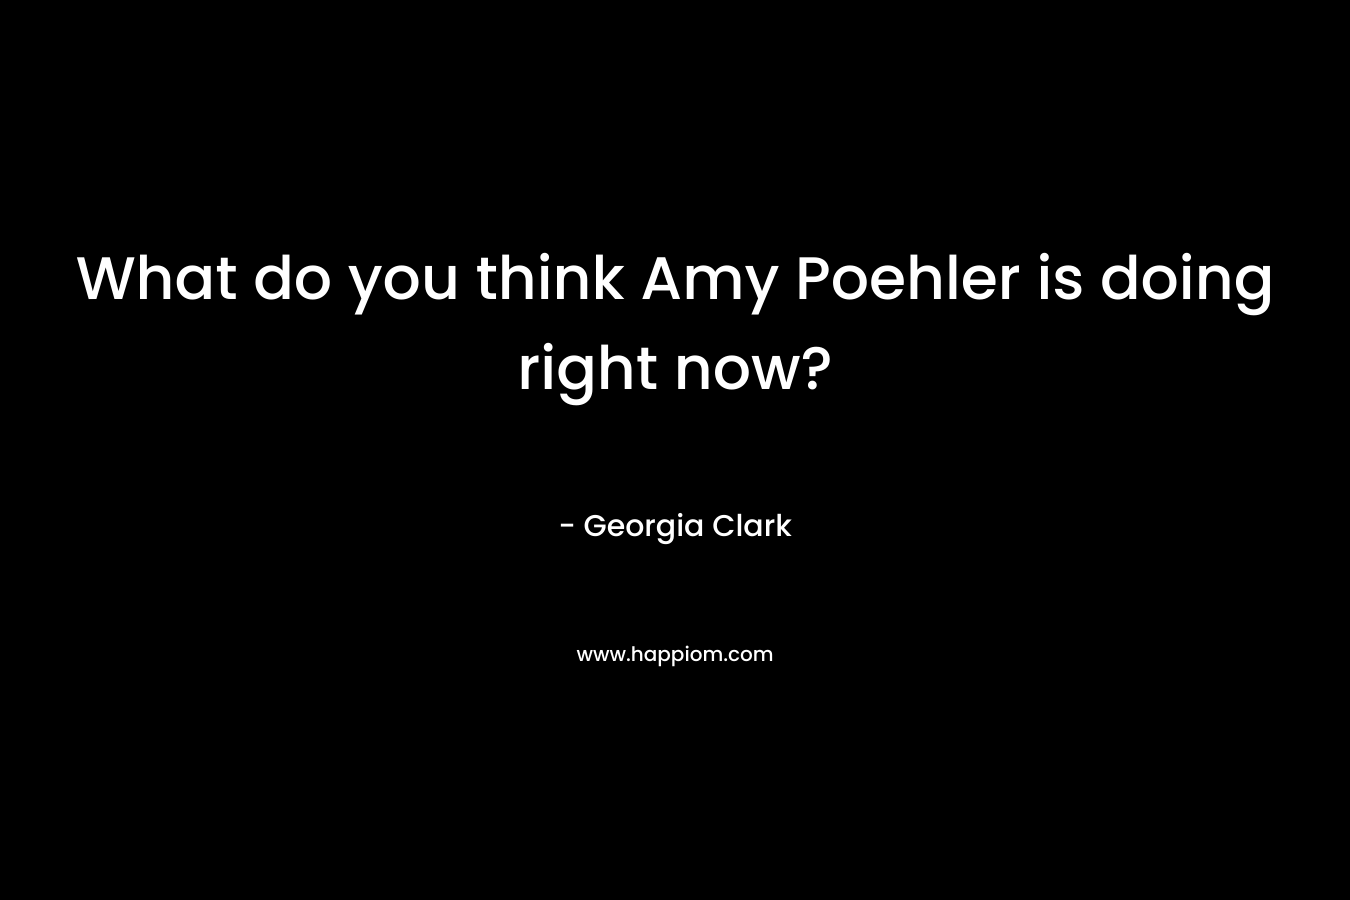 What do you think Amy Poehler is doing right now? – Georgia Clark